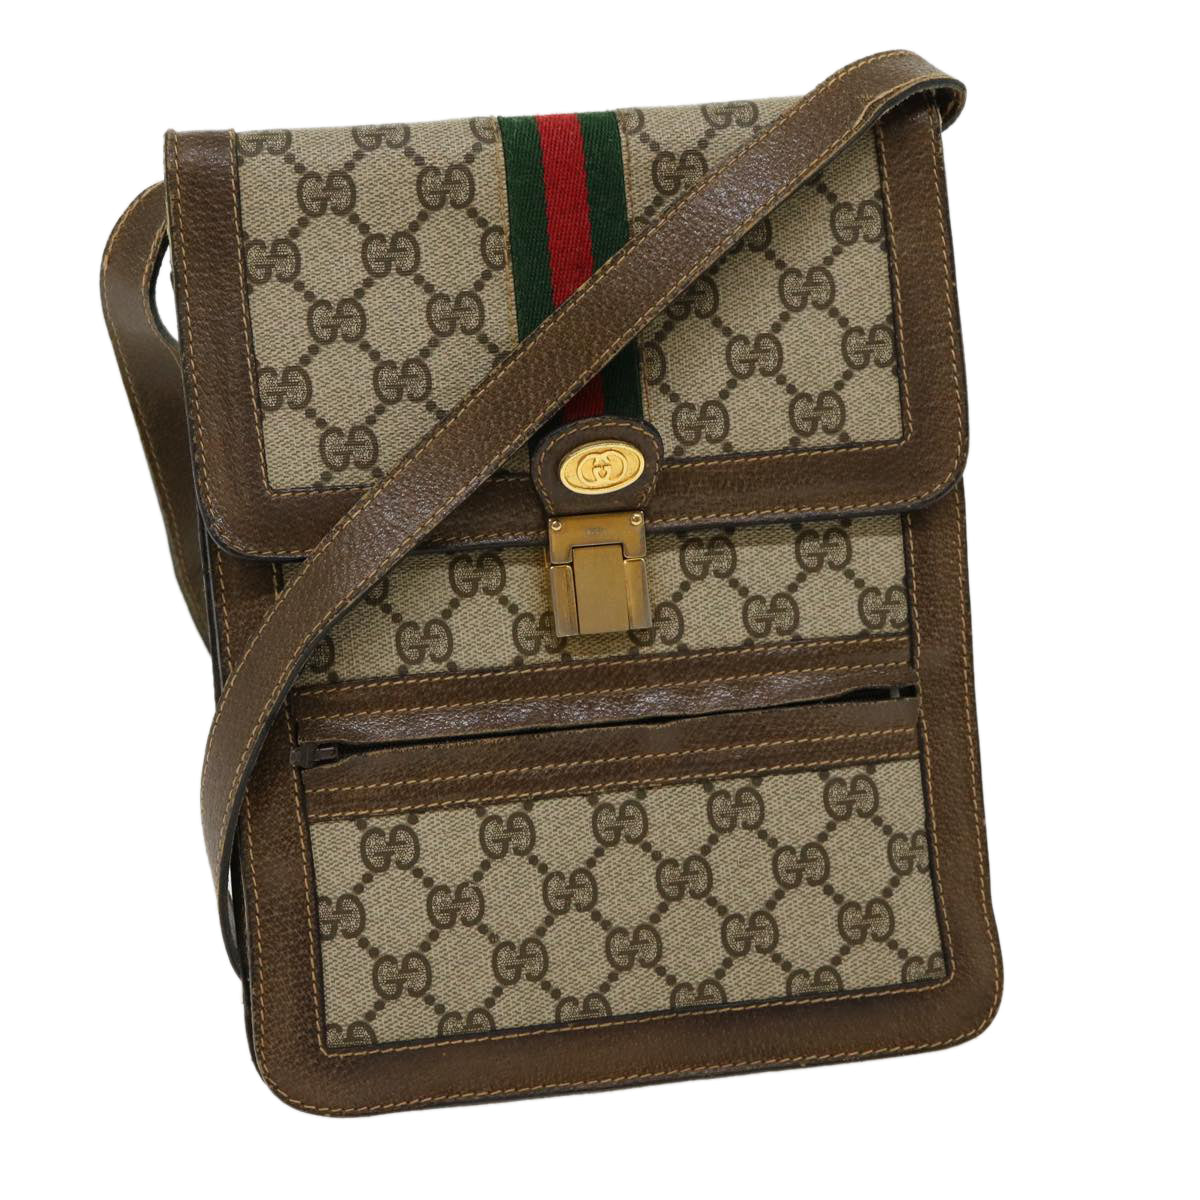 GUCCI GG Canvas Web Sherry Line Shoulder Bag Beige Red Green Auth rd2223